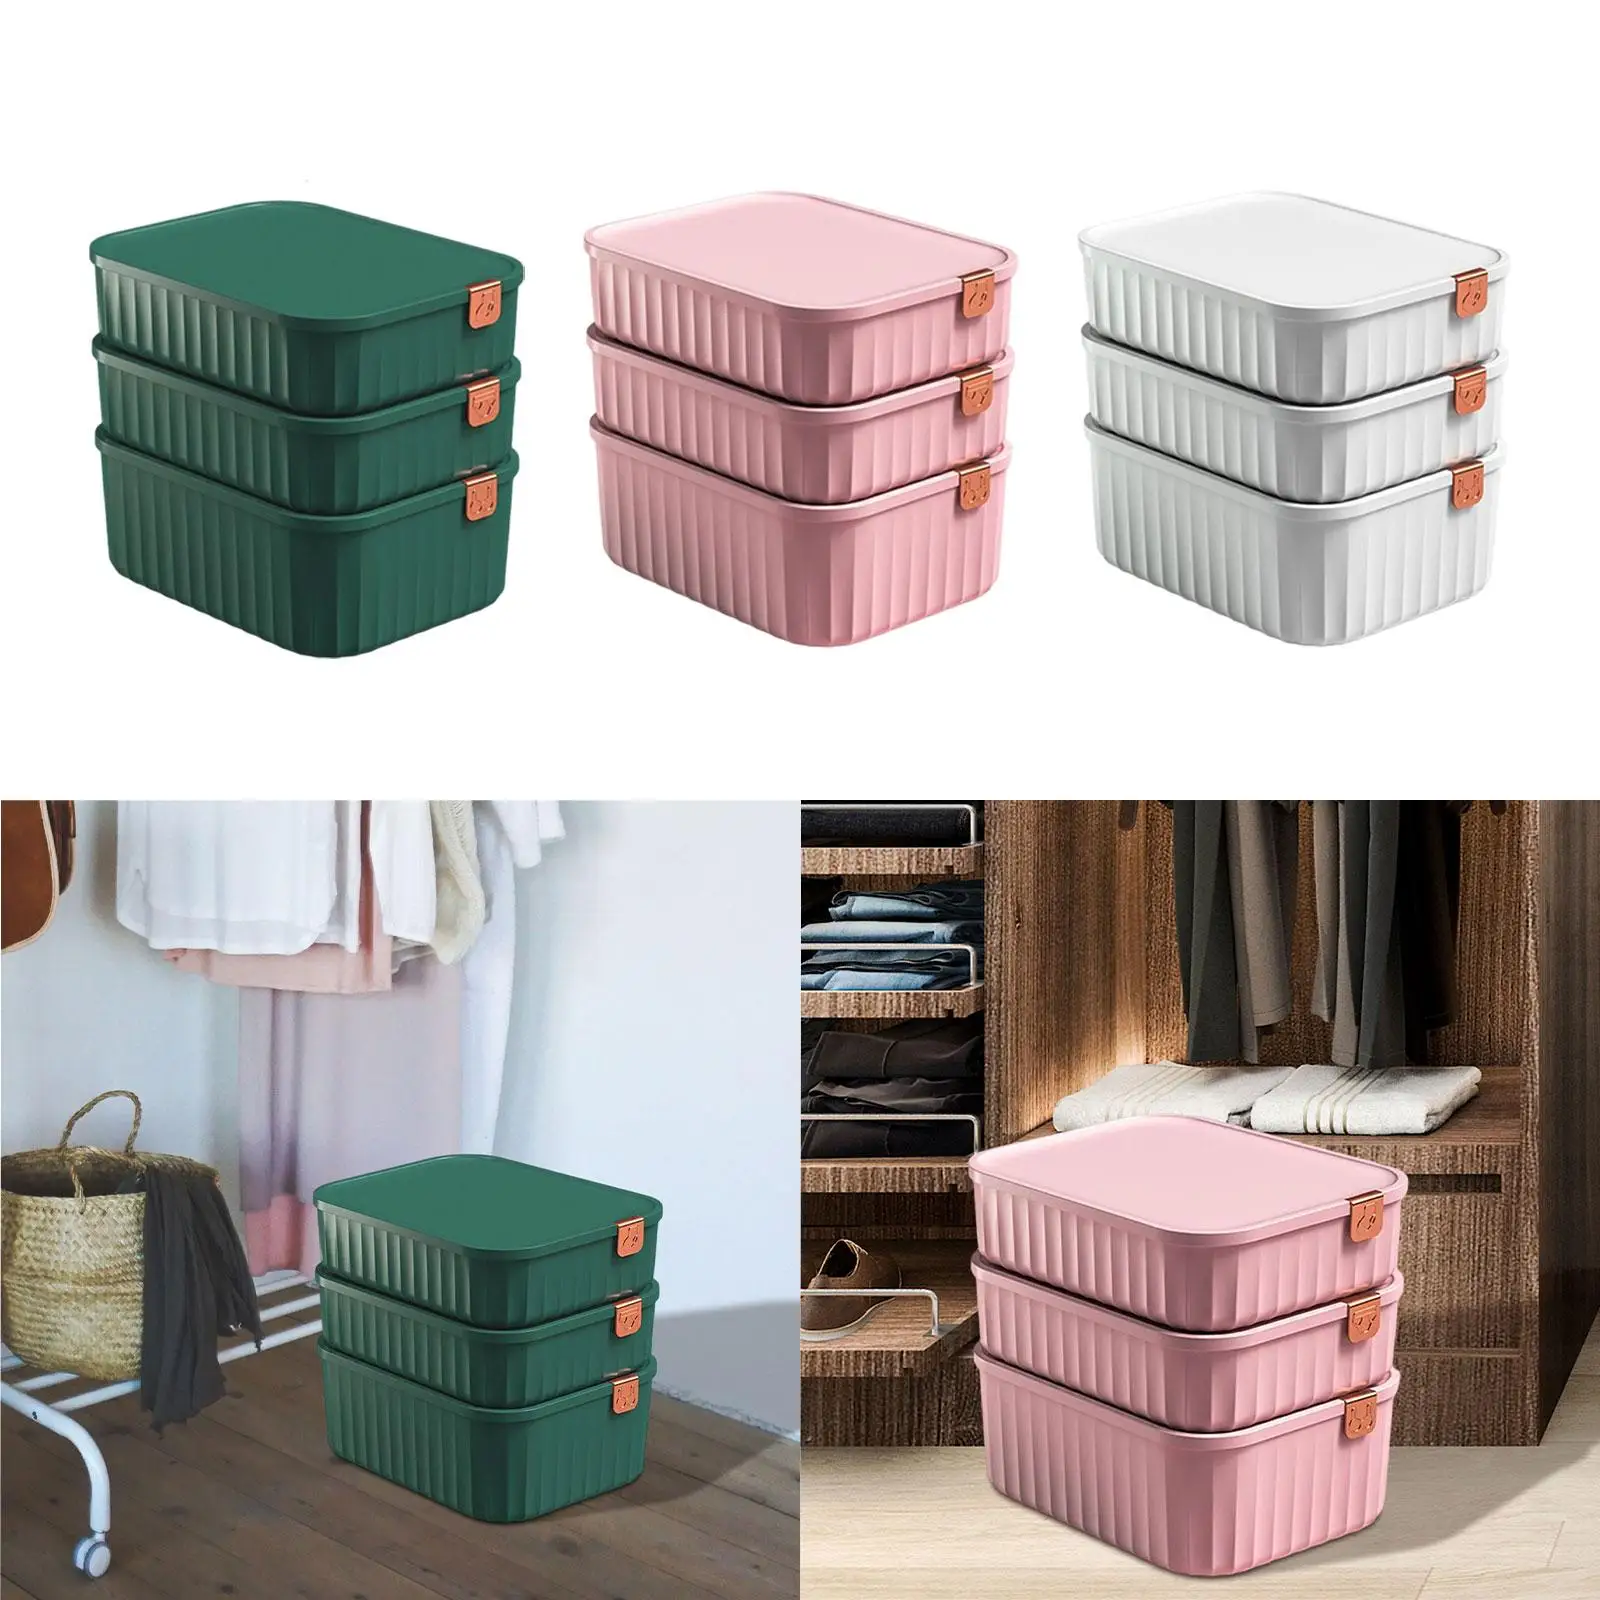 3x Drawer Organizer Leggings Storage Basket Box Compartments Separated Container Closet Storage Boxes Clothes Ties Bra Organizer